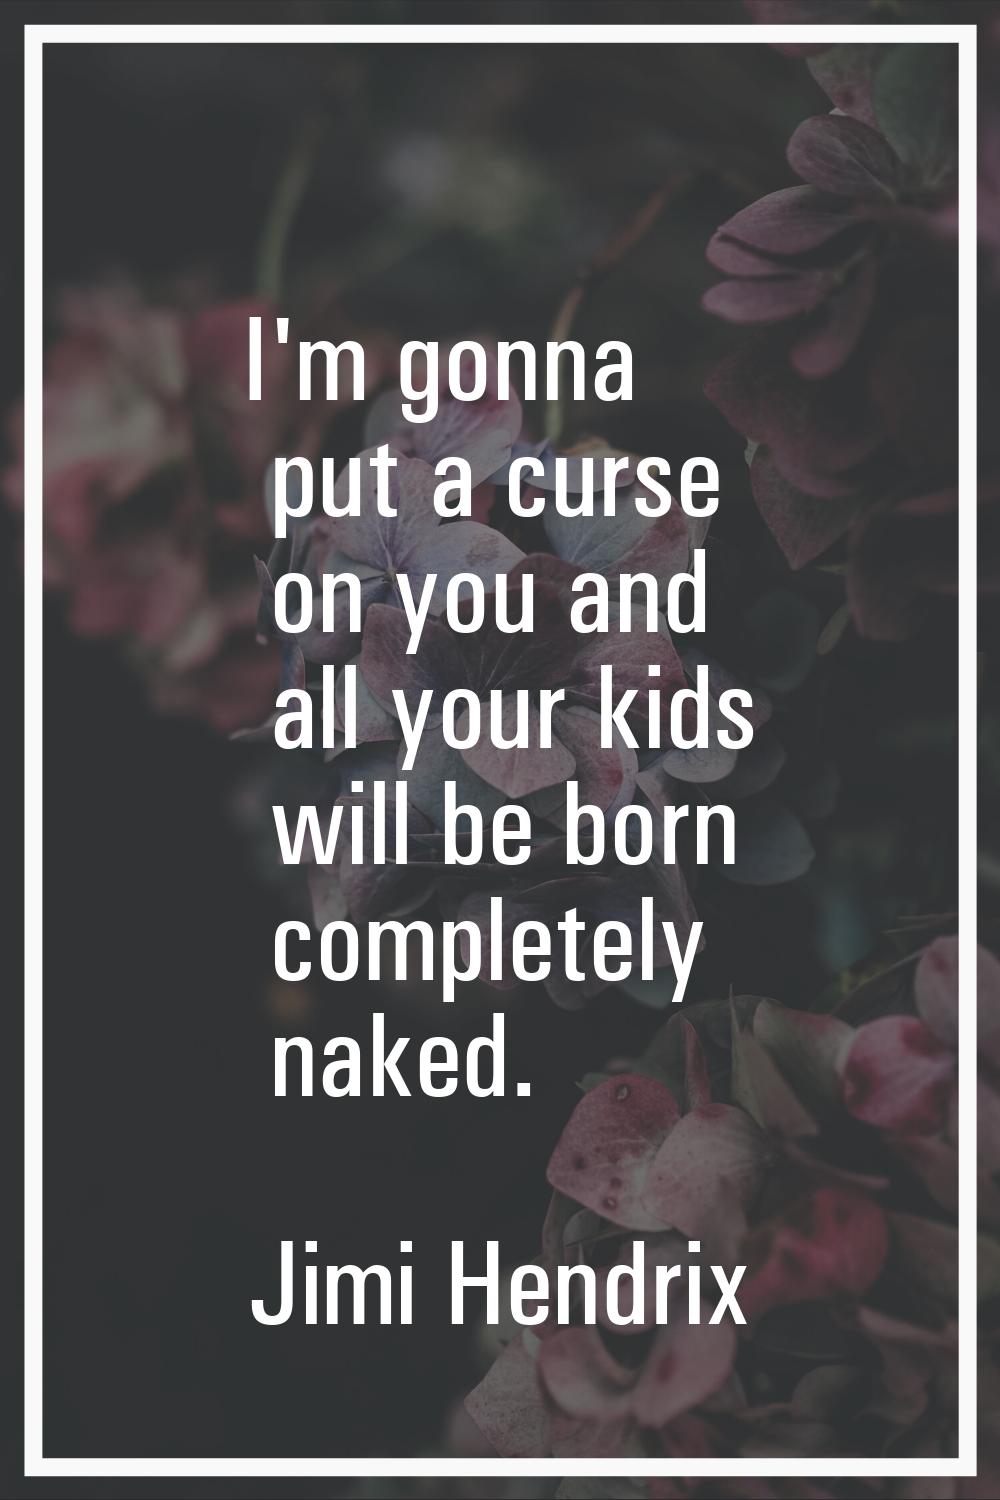 I'm gonna put a curse on you and all your kids will be born completely naked.